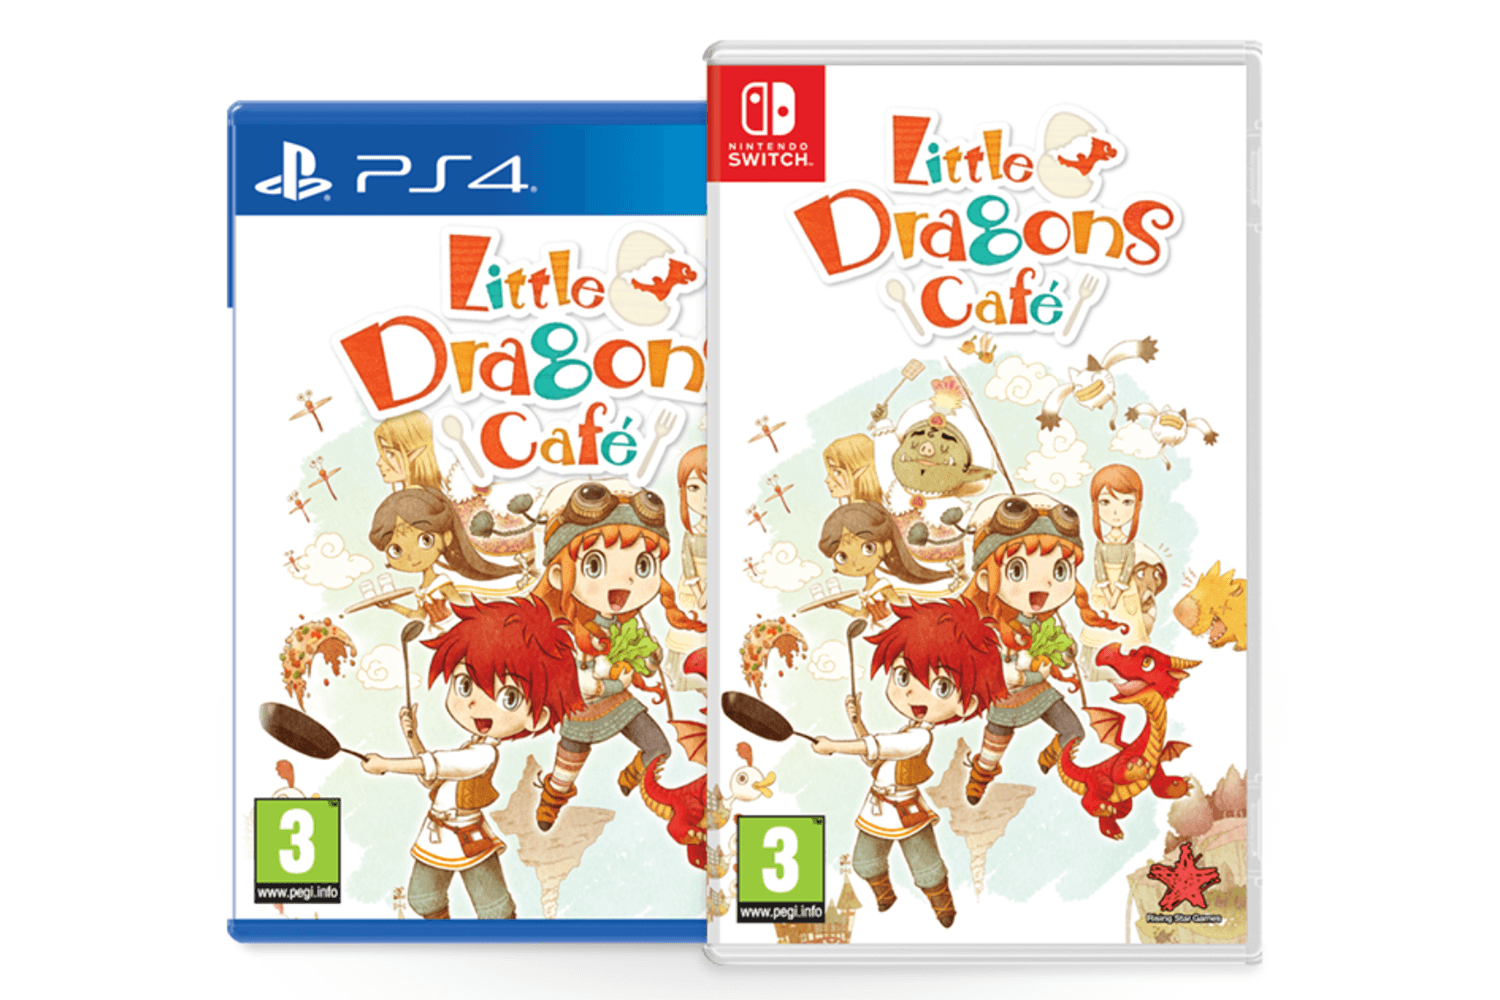 Little Dragons Cafe on PS4 and Nintendo Switch